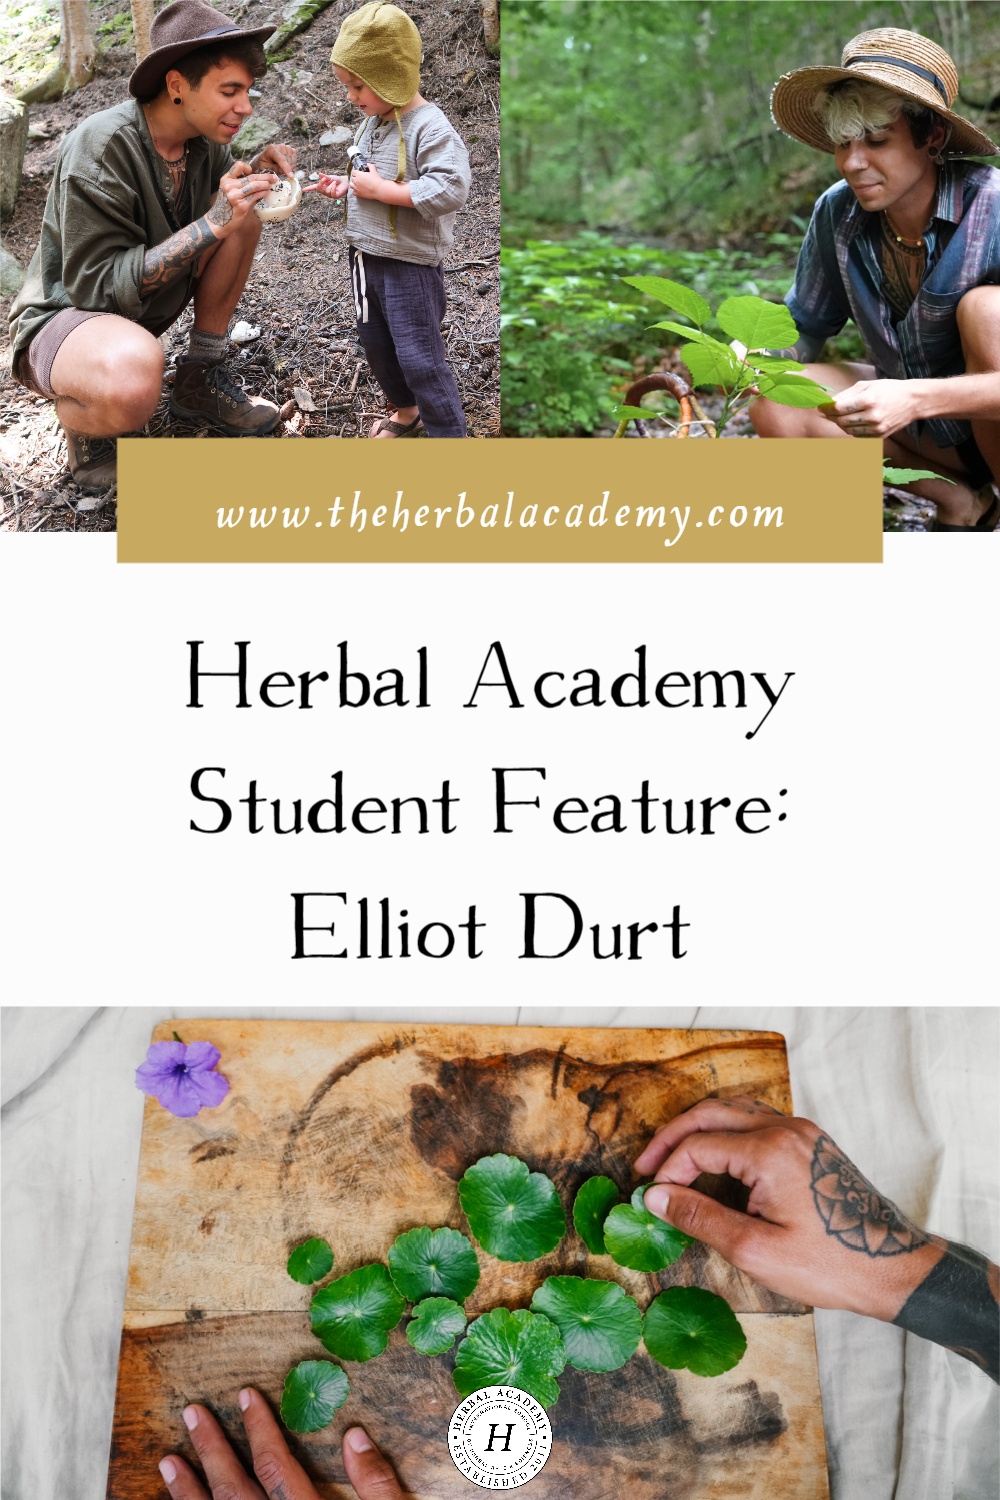 Herbal Academy Student Feature: Elliot Durt | Herbal Academy | HA student, Elliot Durt, enjoys exploring different forests and bioregions, learning about the native herbs that grow in each area.